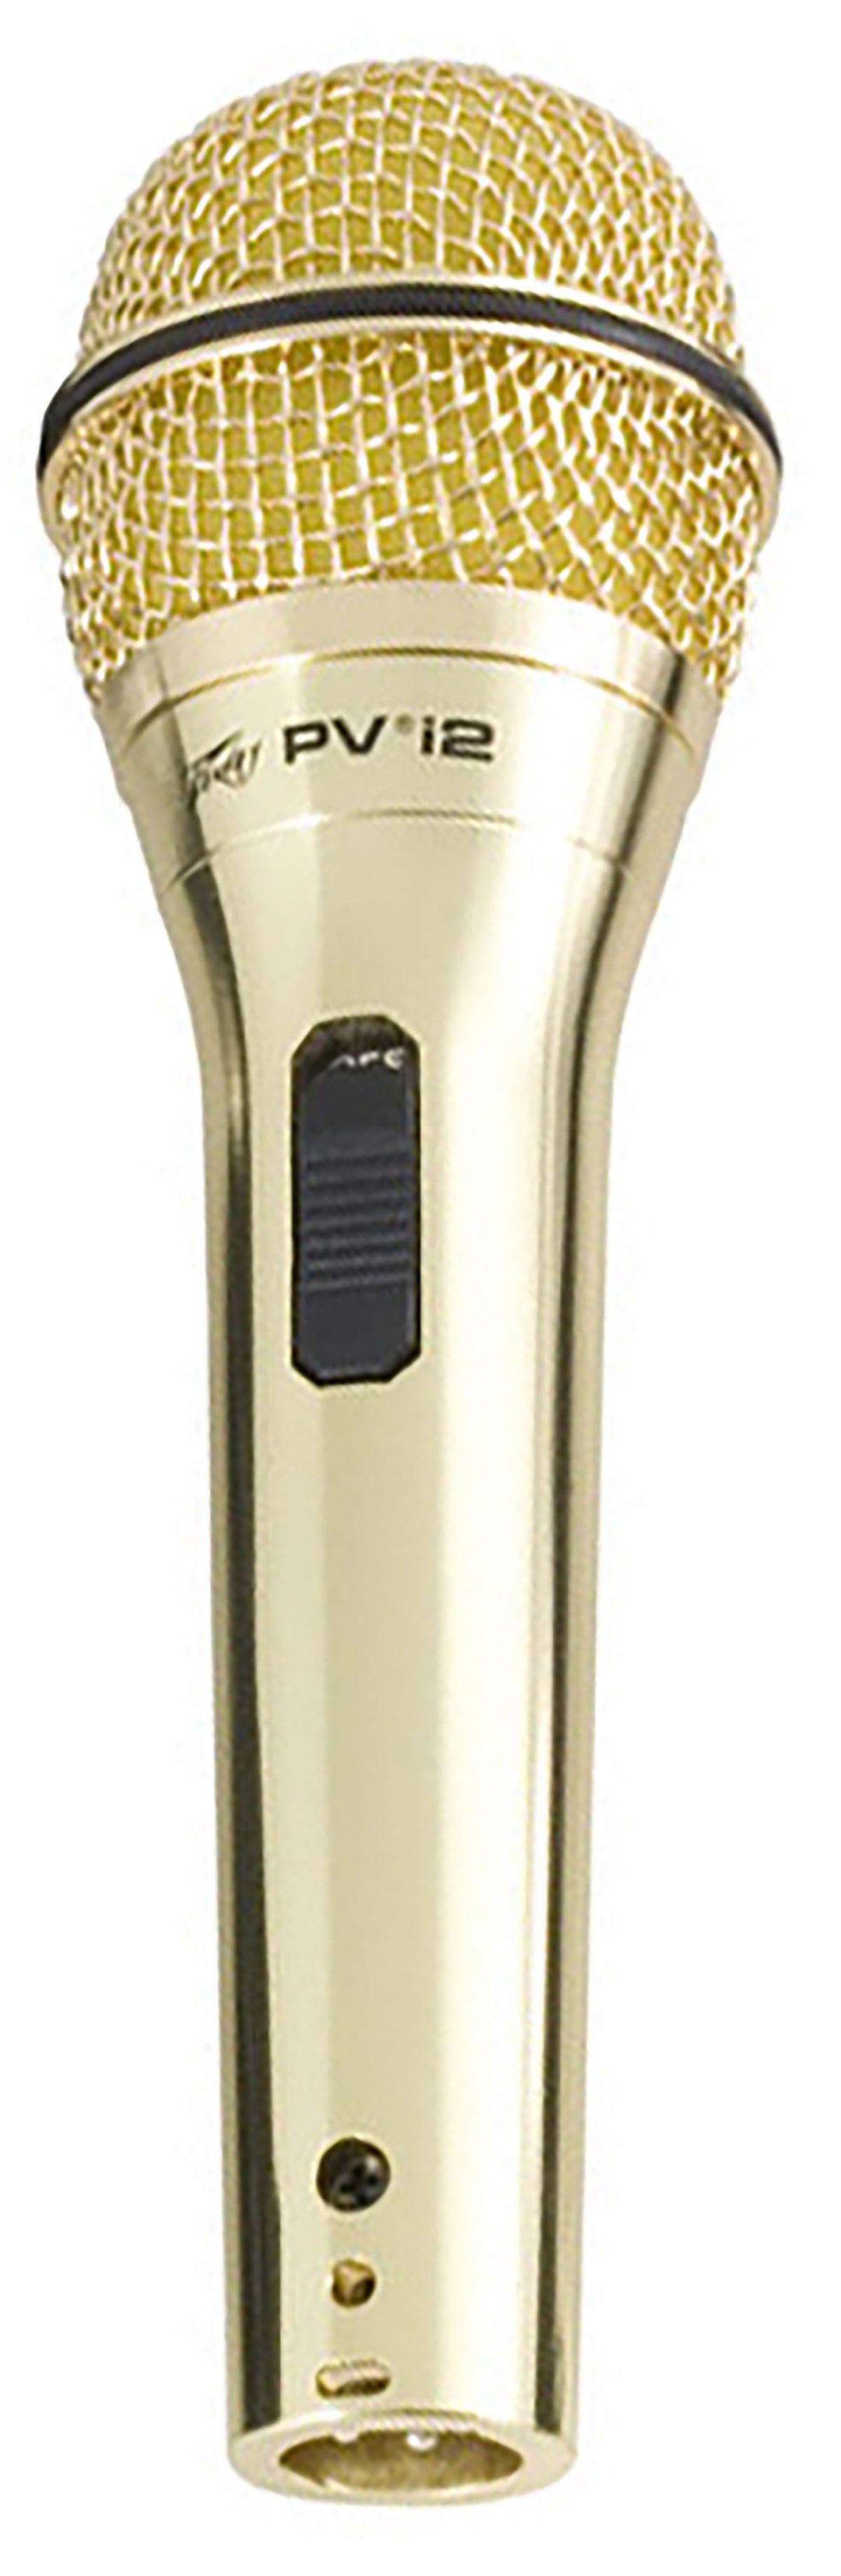 An image of Peavey Pvi2 Dynamic Microphone XLR Gold Finish - Gift for a Musician | PMT Onlin...